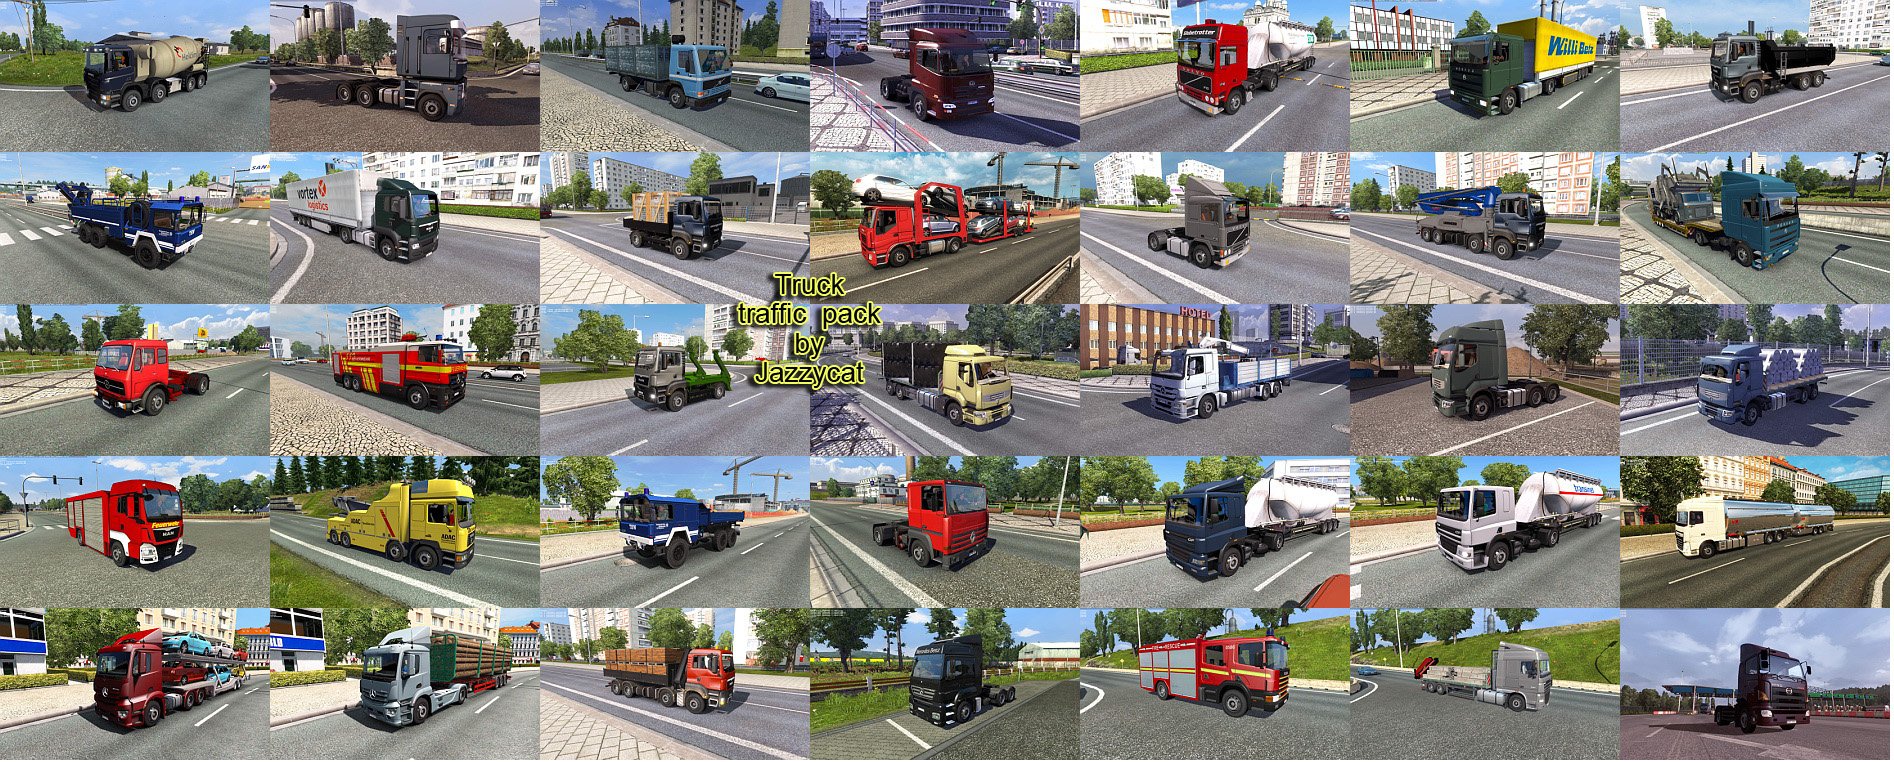 Truck Traffic Pack v2.3.1 by Jazzycat [1.25.x]